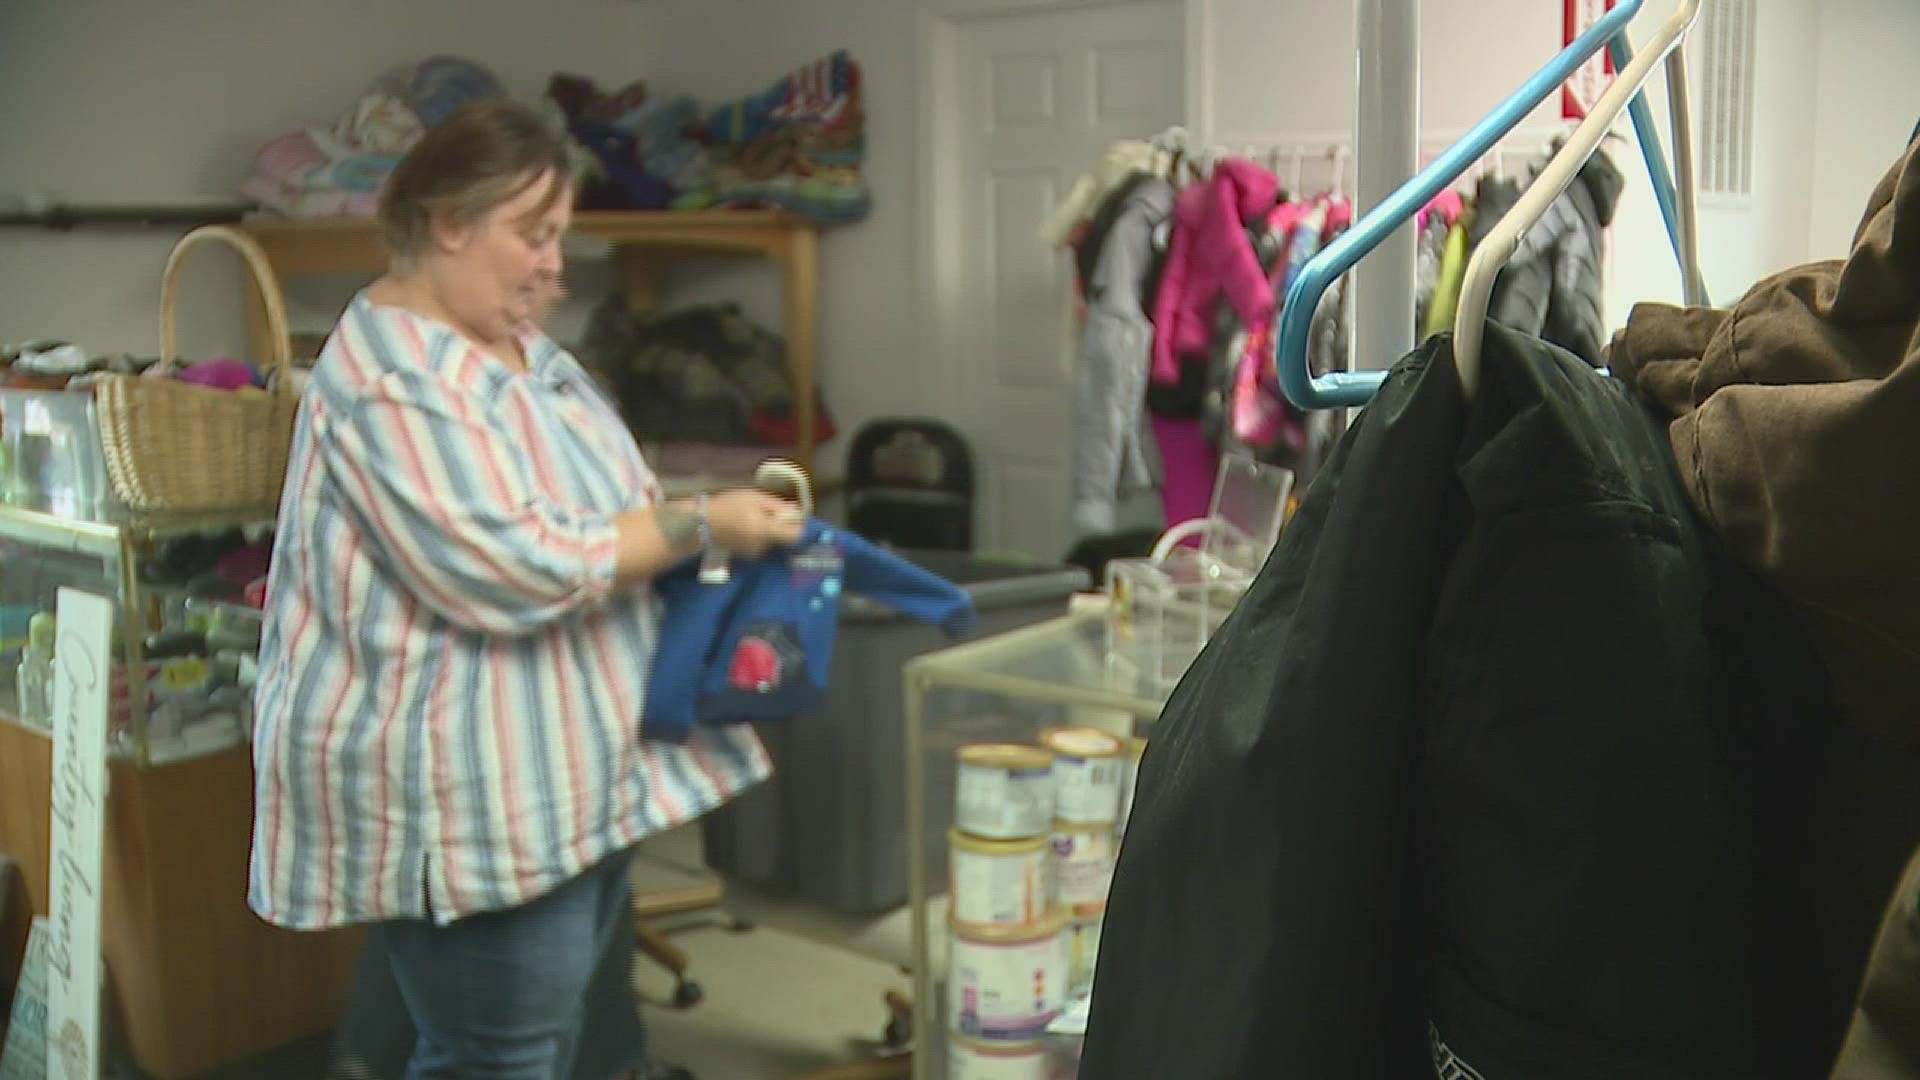 Sherry Bandy is "Multiplying Good" by connecting customers with clothes, household items and more - all for free.